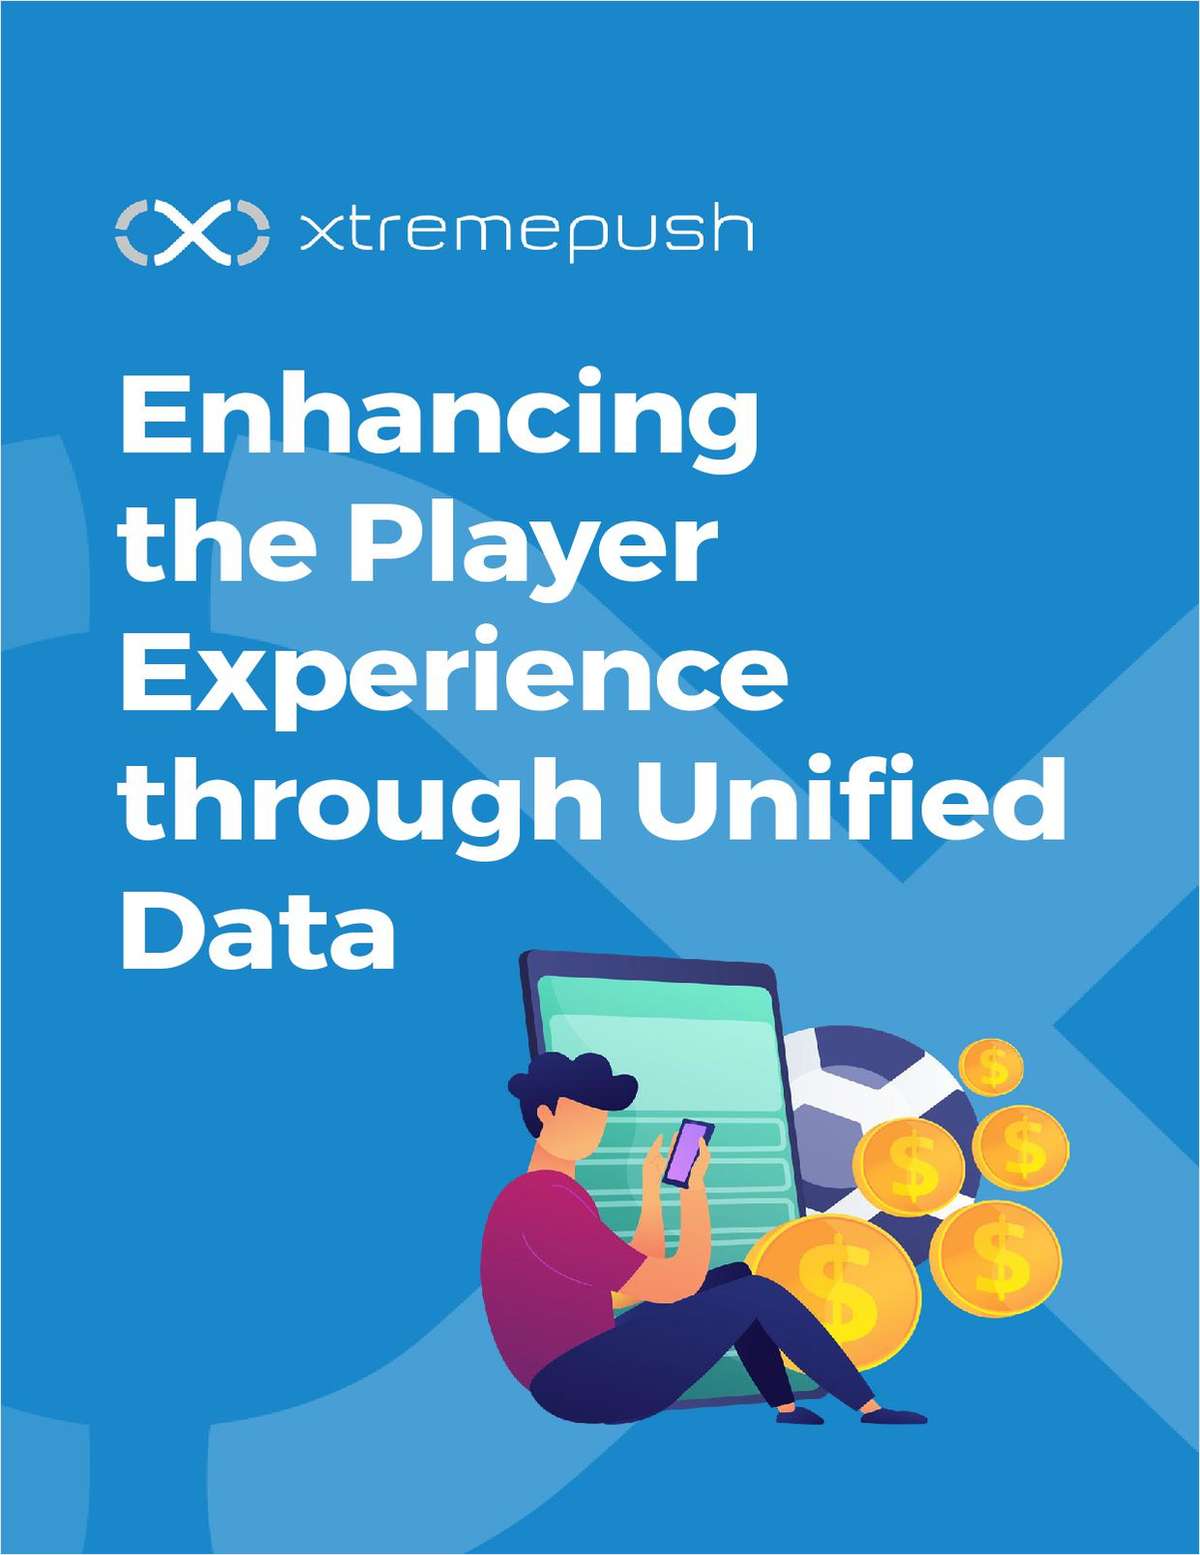 The Ultimate SB&G Playbook: Enhancing the Player Experience through Unified Data